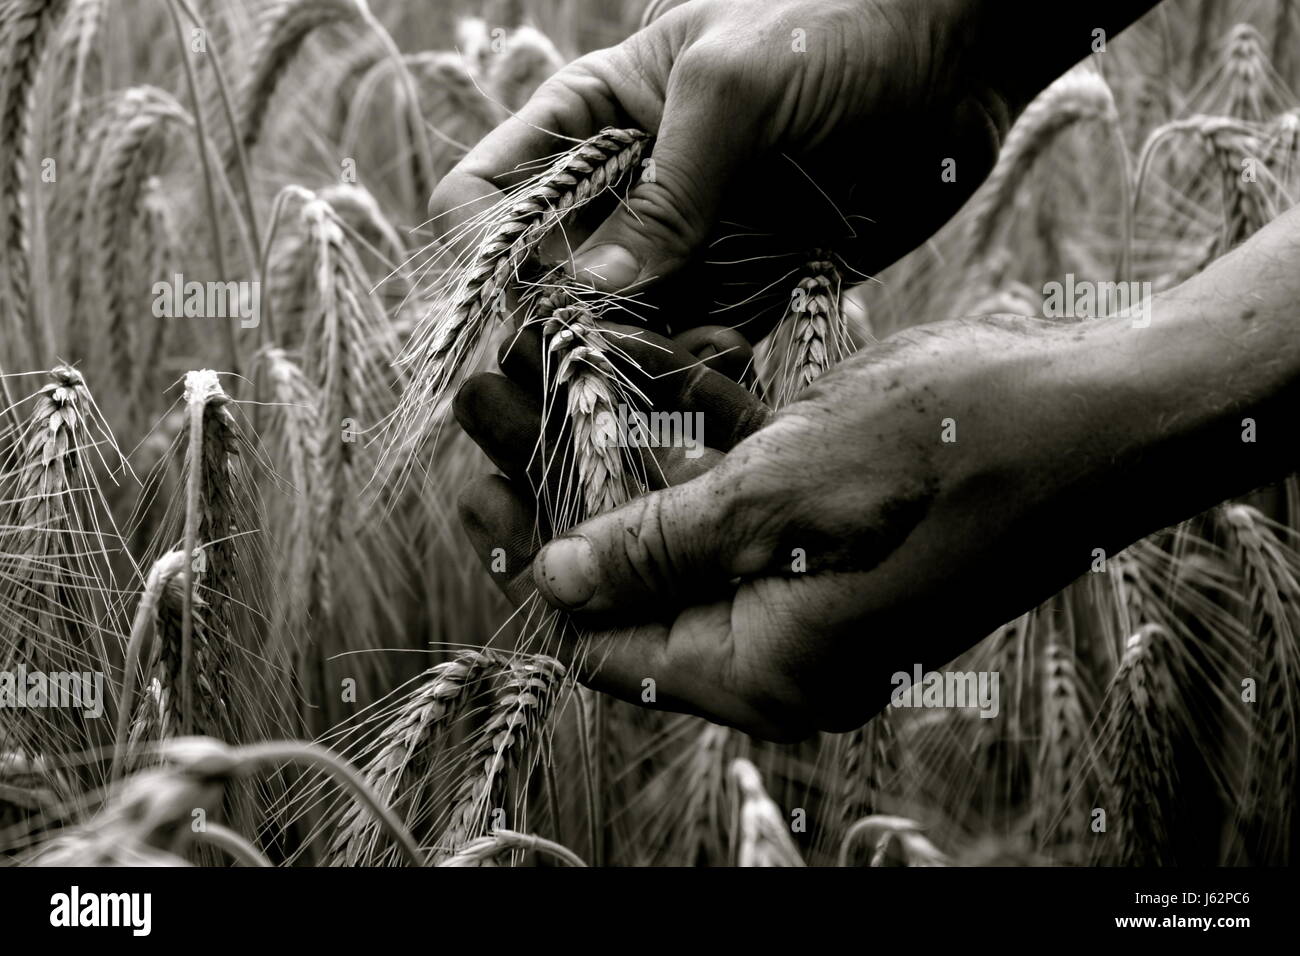 hand hands agriculture farming feel farmer barley test checking testing sample Stock Photo